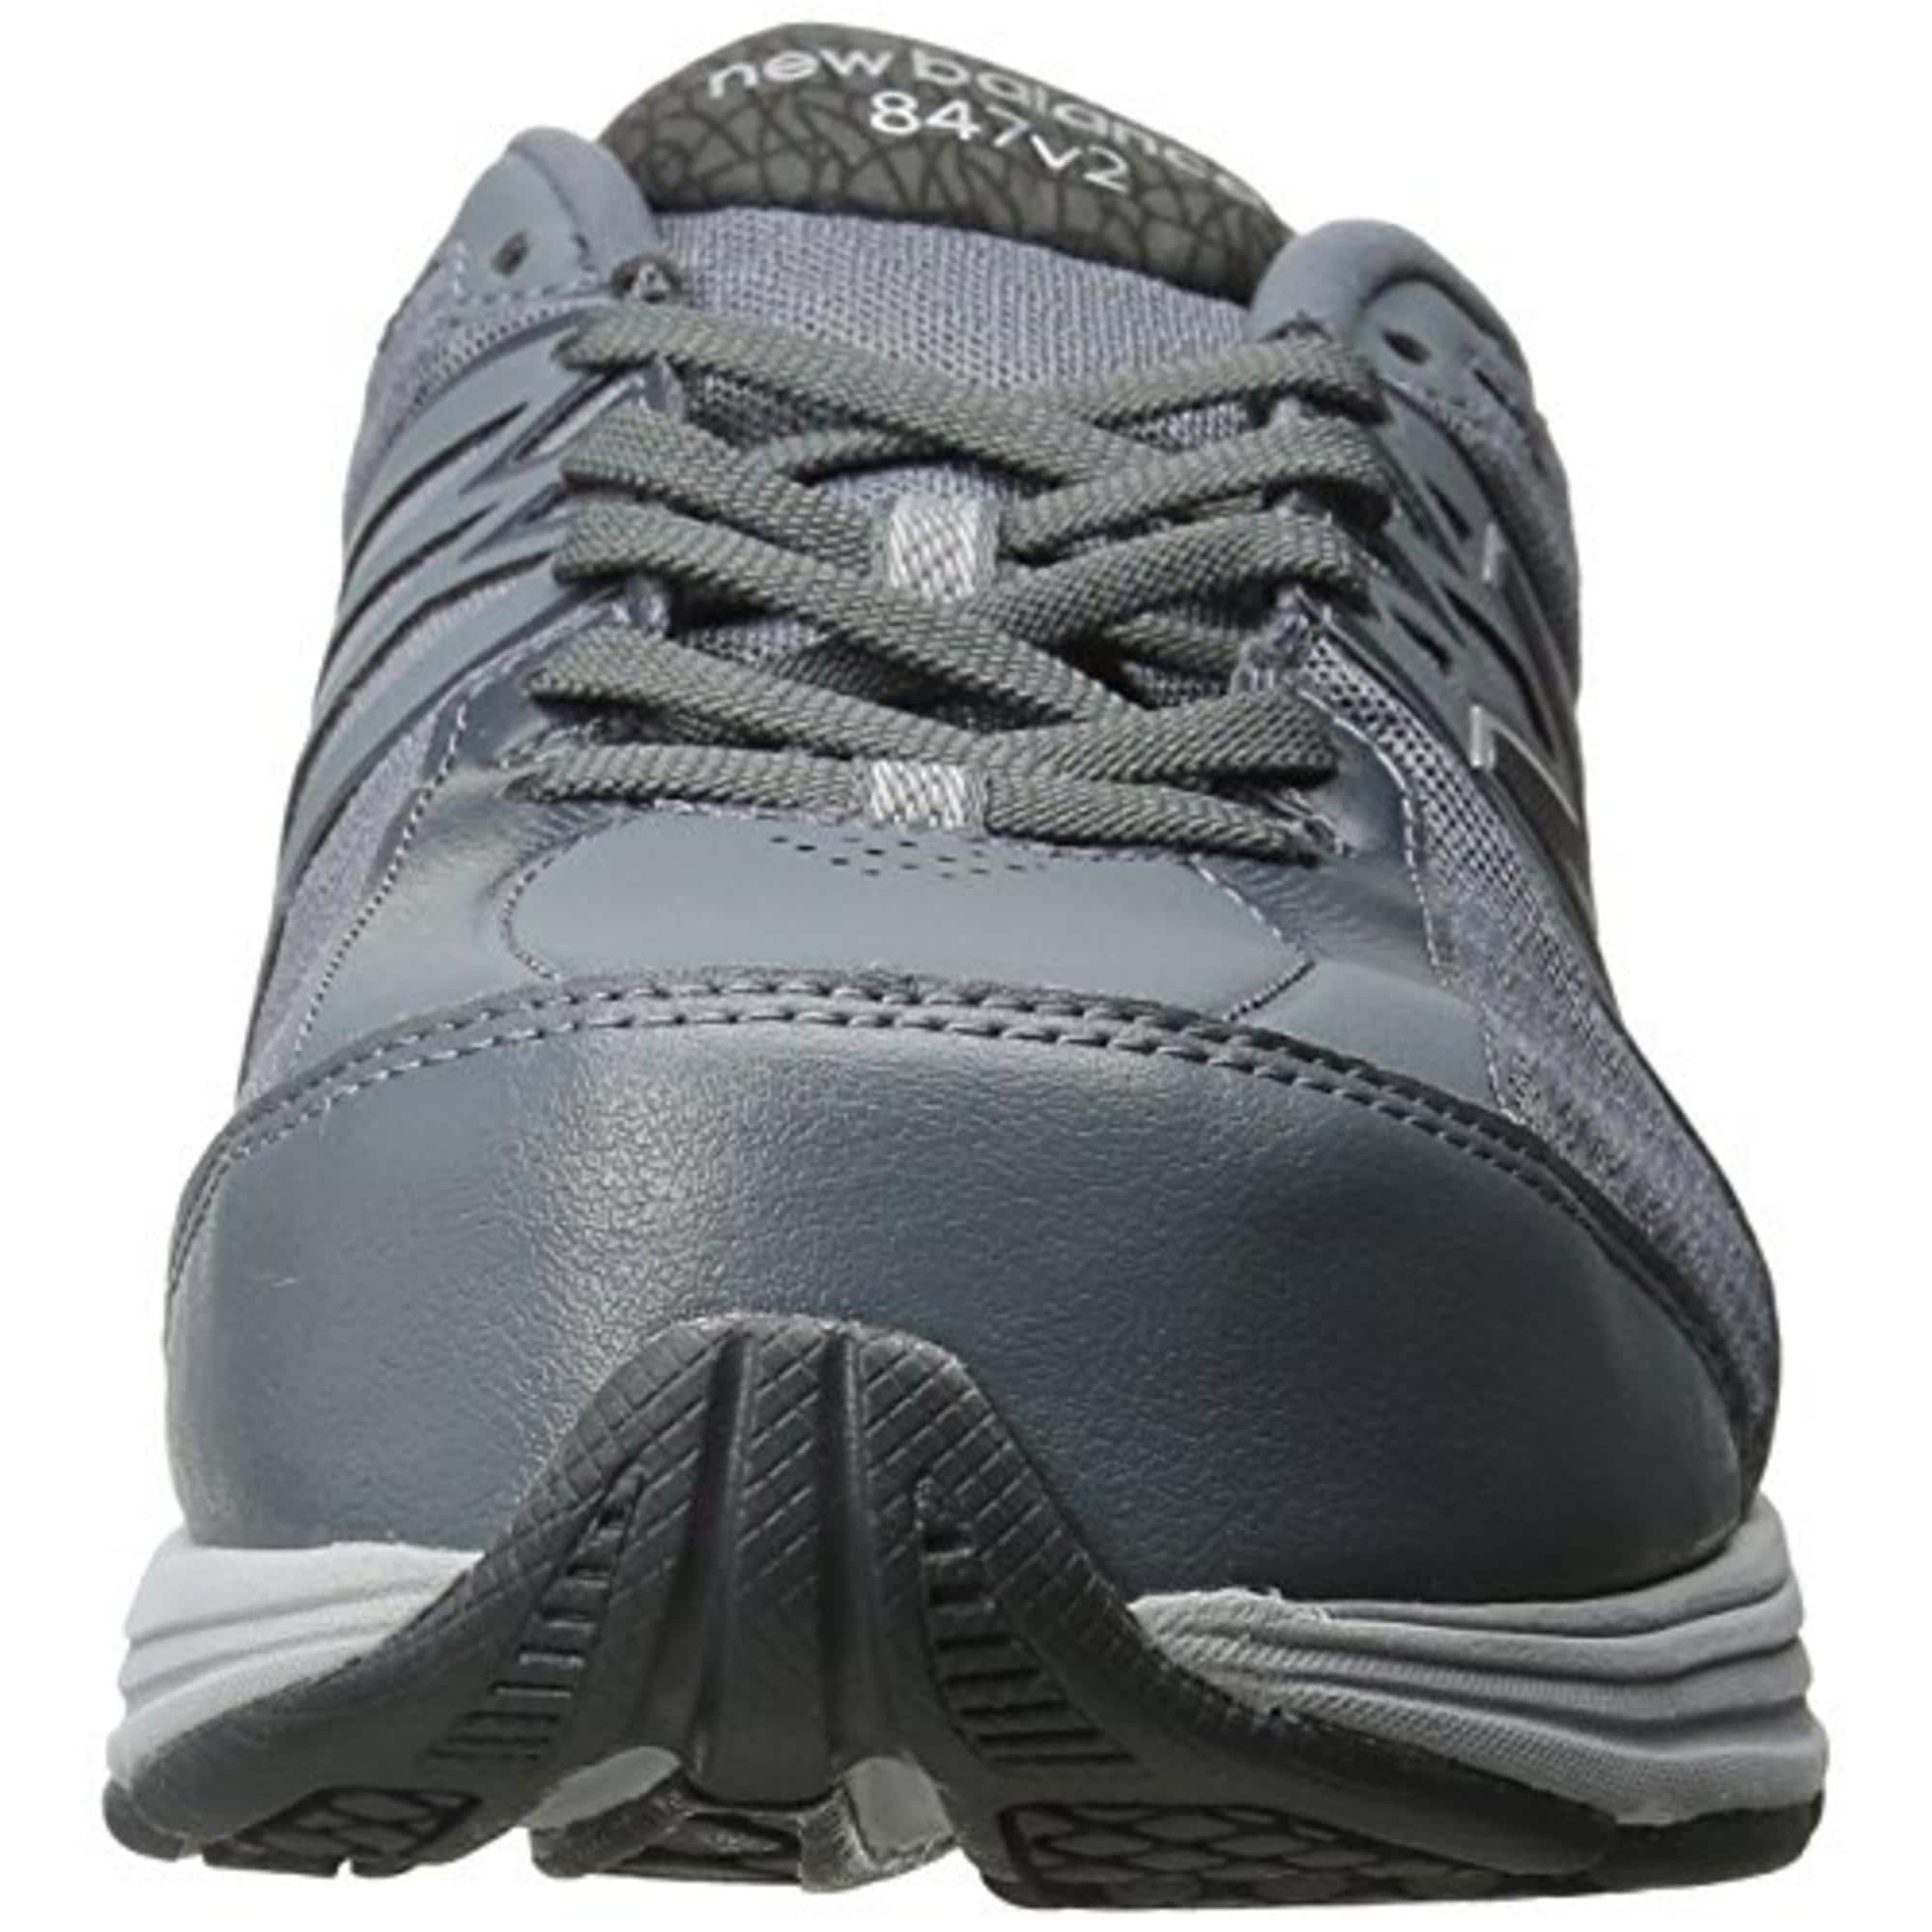 new balance walking shoes with rollbar technology and a wide base